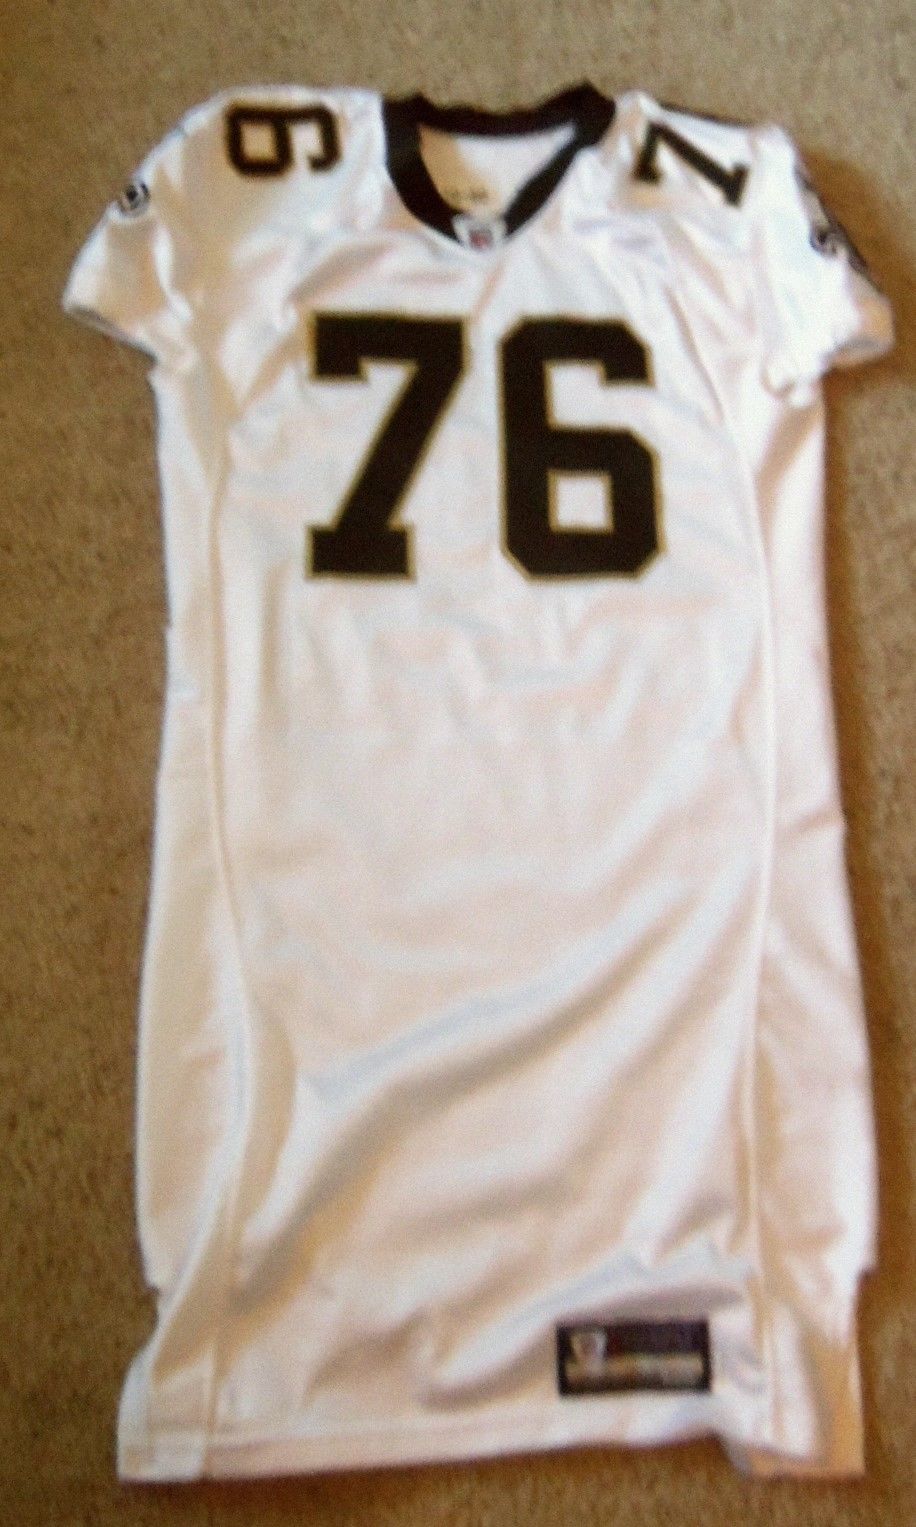 PAT MCQUISTAN GAME USED ISSUED JERSEY NEW ORLEANS SAINTS